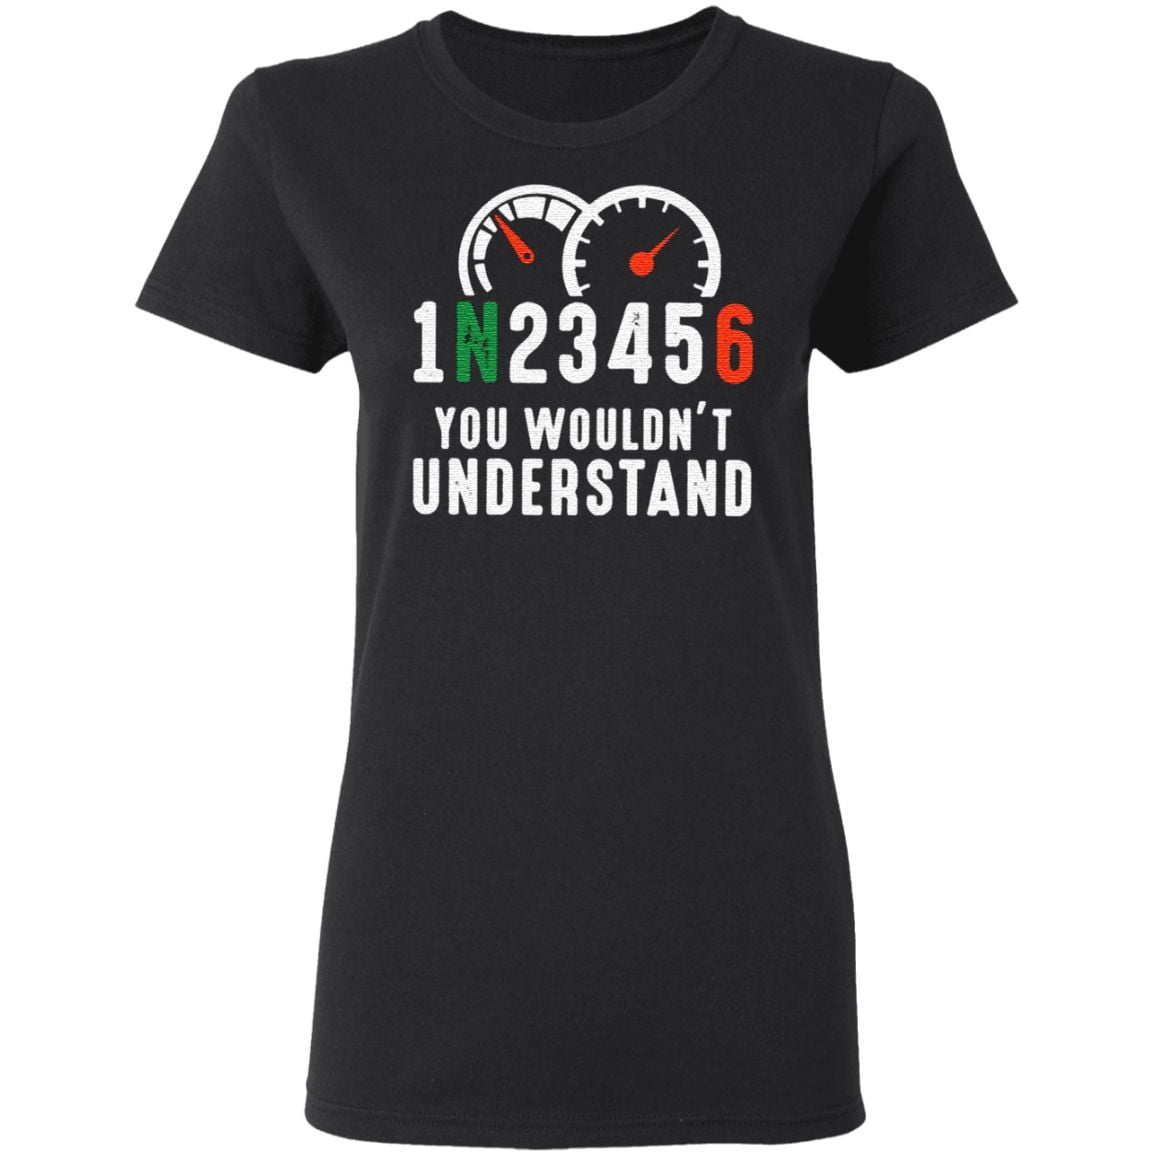 You Wouldn’t Understand T Shirt